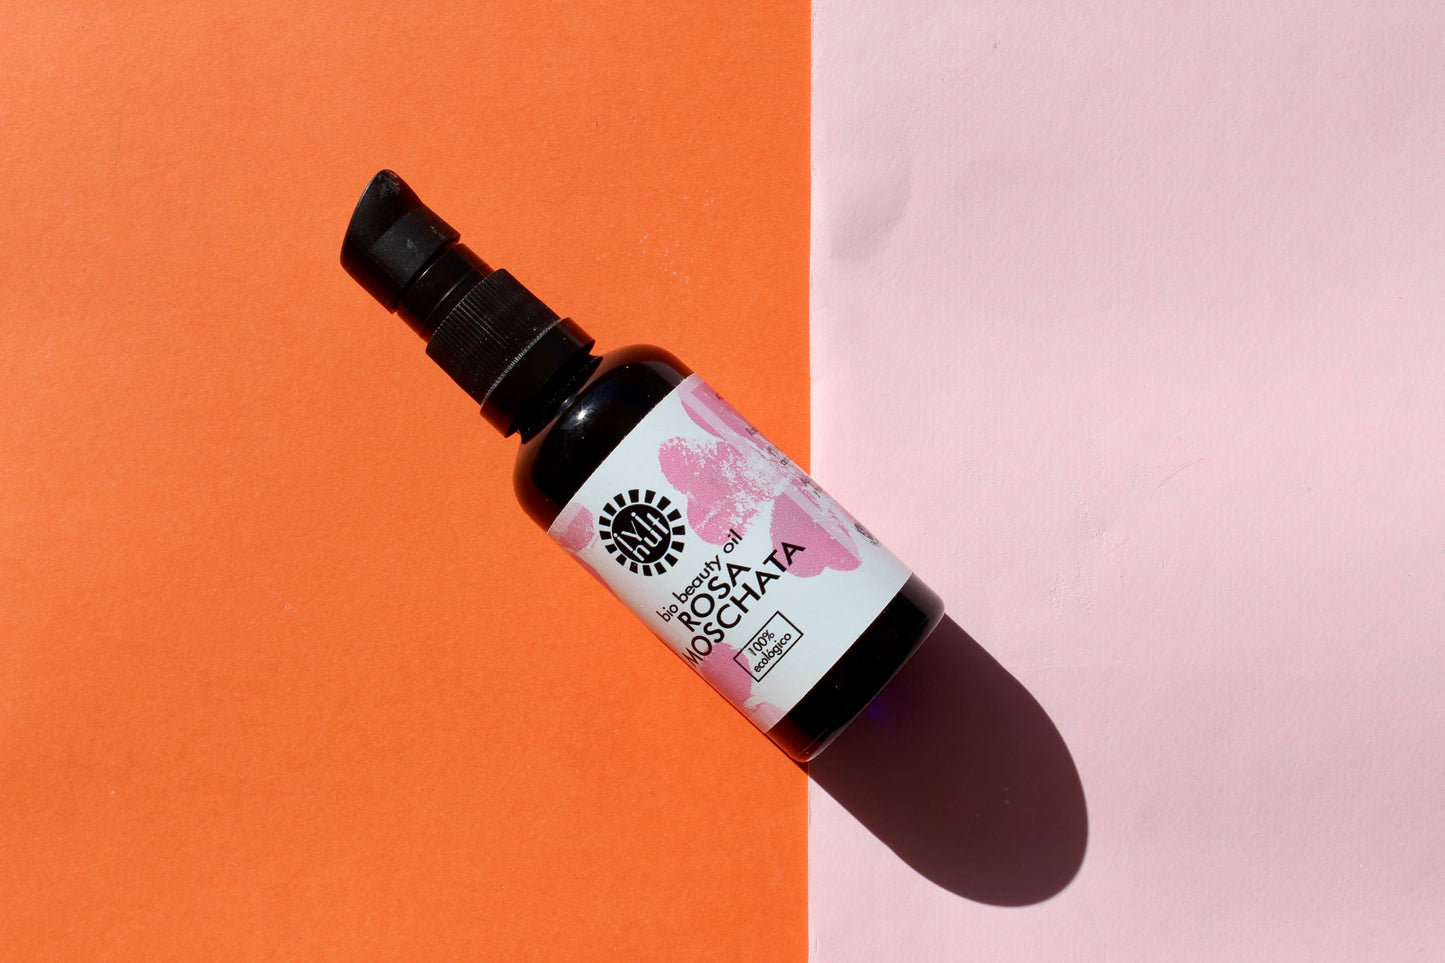 100% natural, pure and BIO rosehip oil